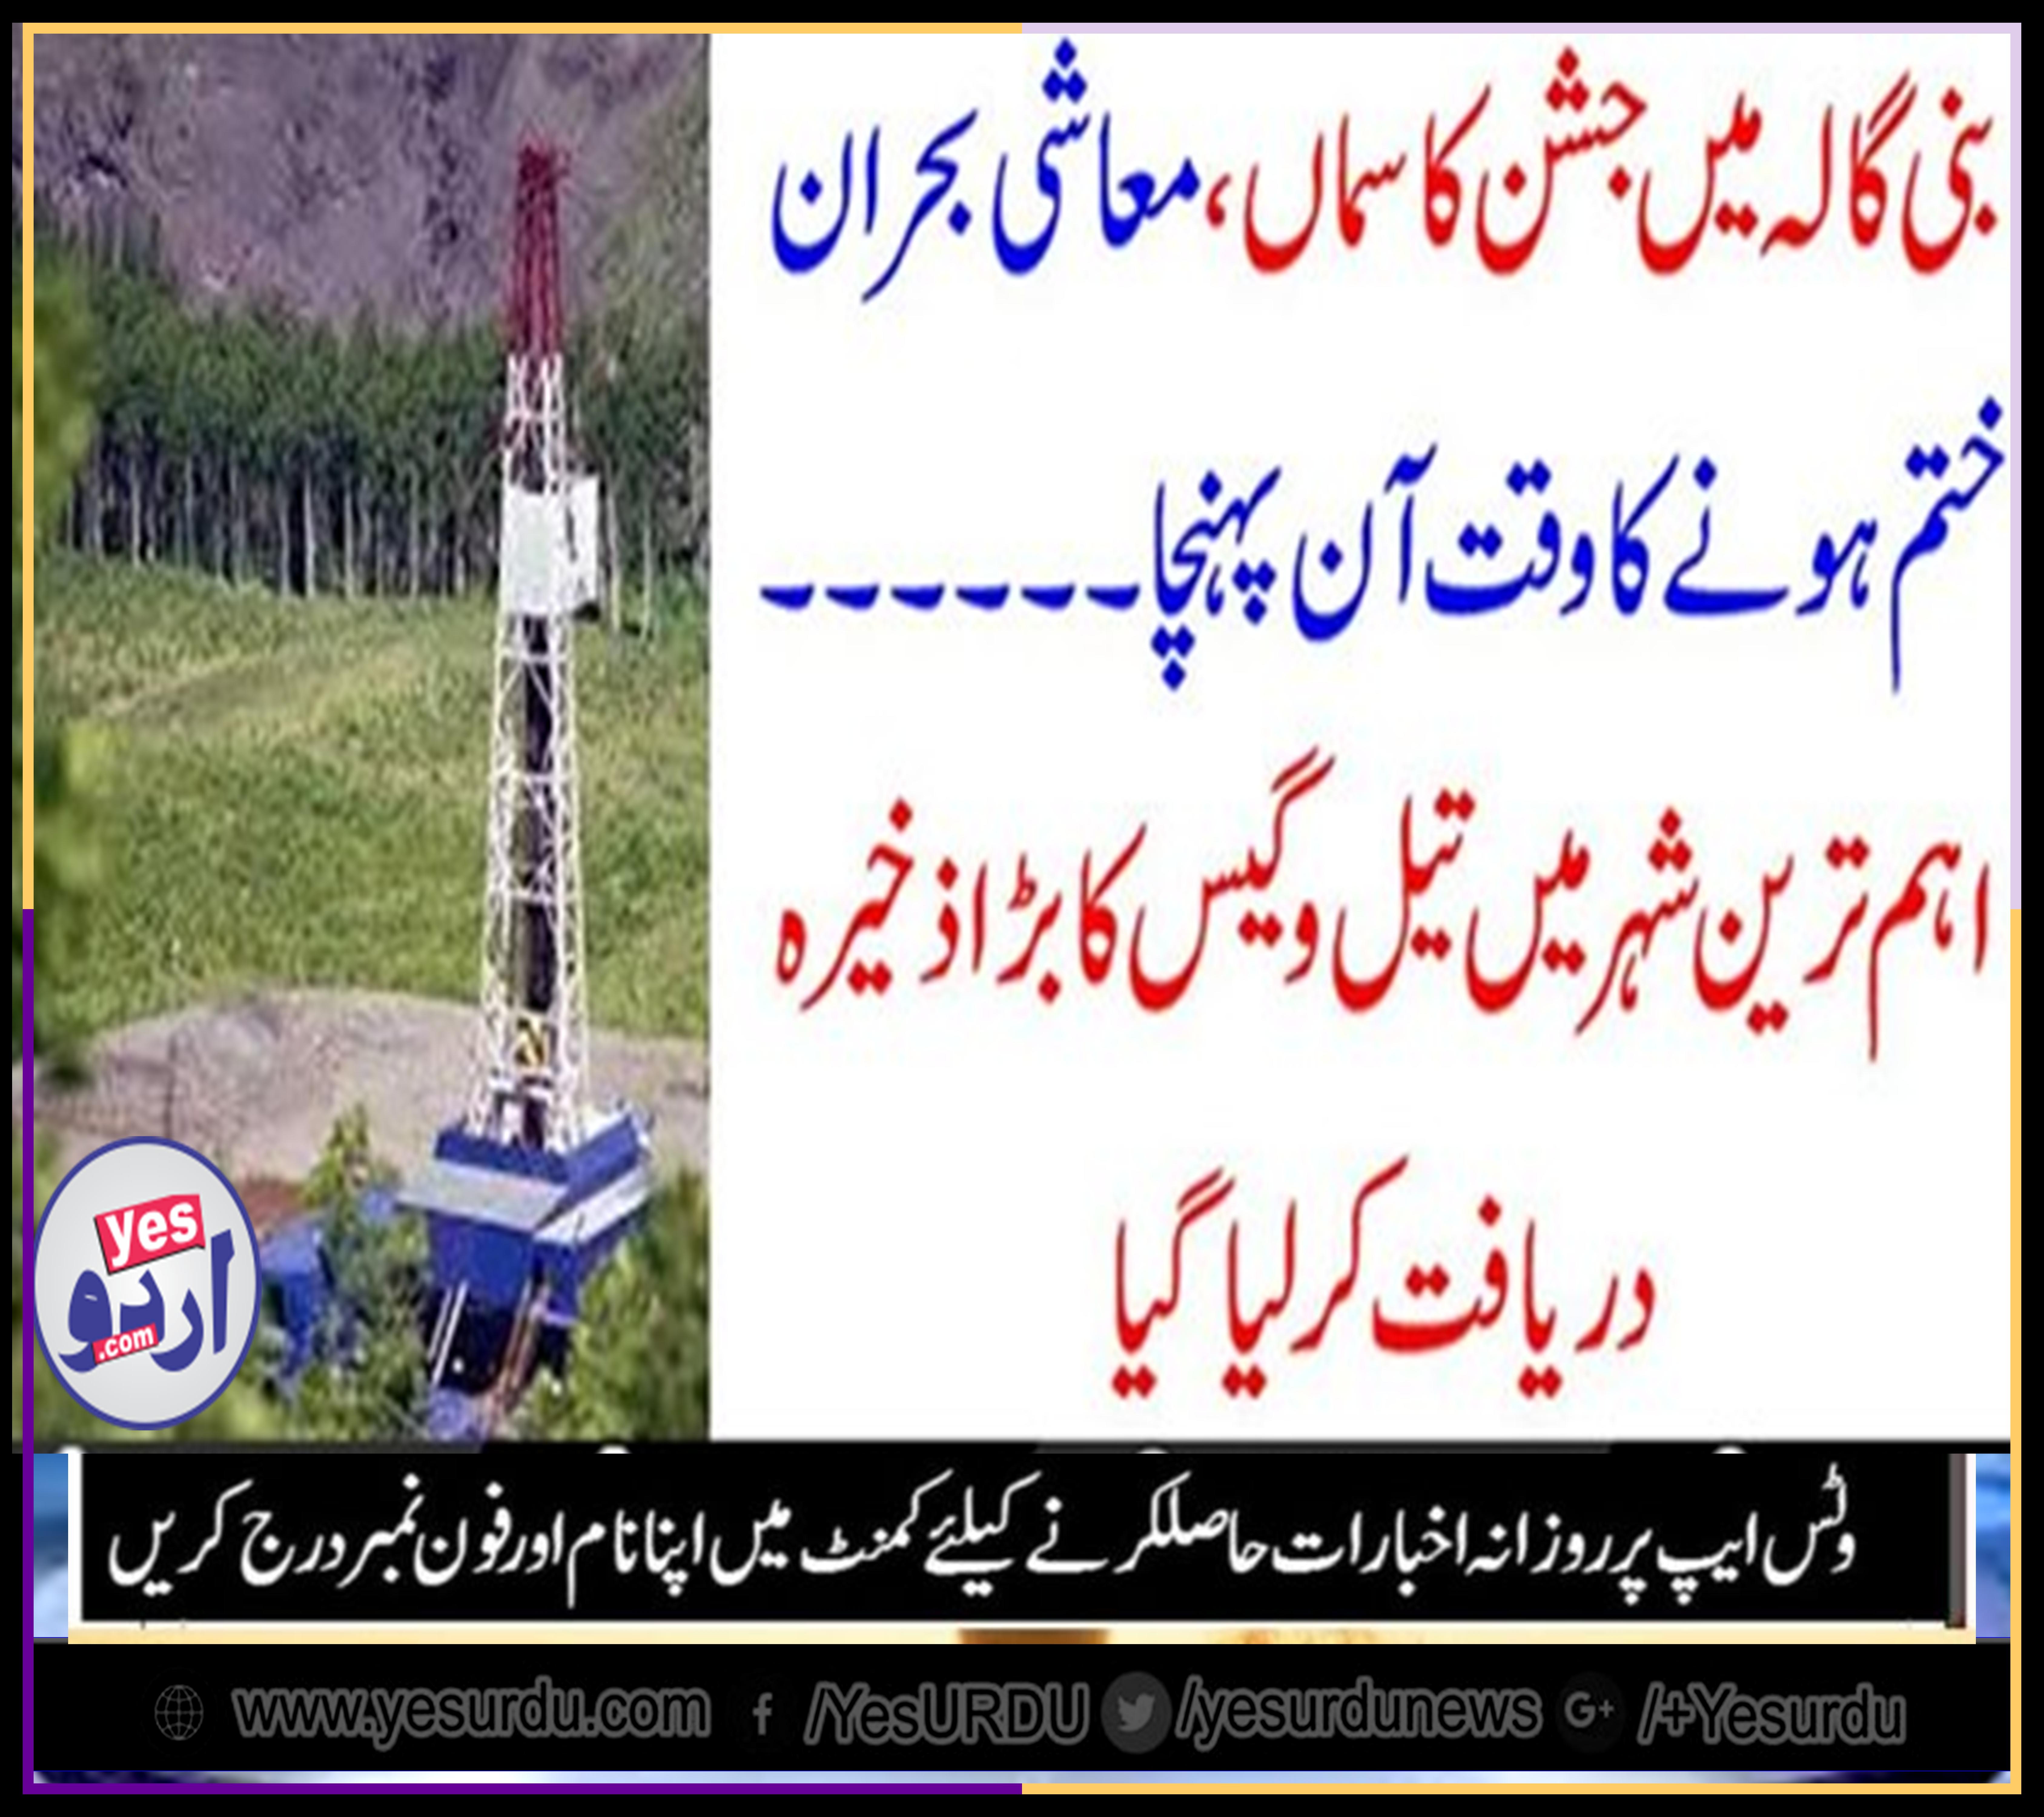 BANIGALA, JASHAN, OIL, AND, GAS, RESOURCES, FOUND, FROM, PROVINCE, OF, KPK